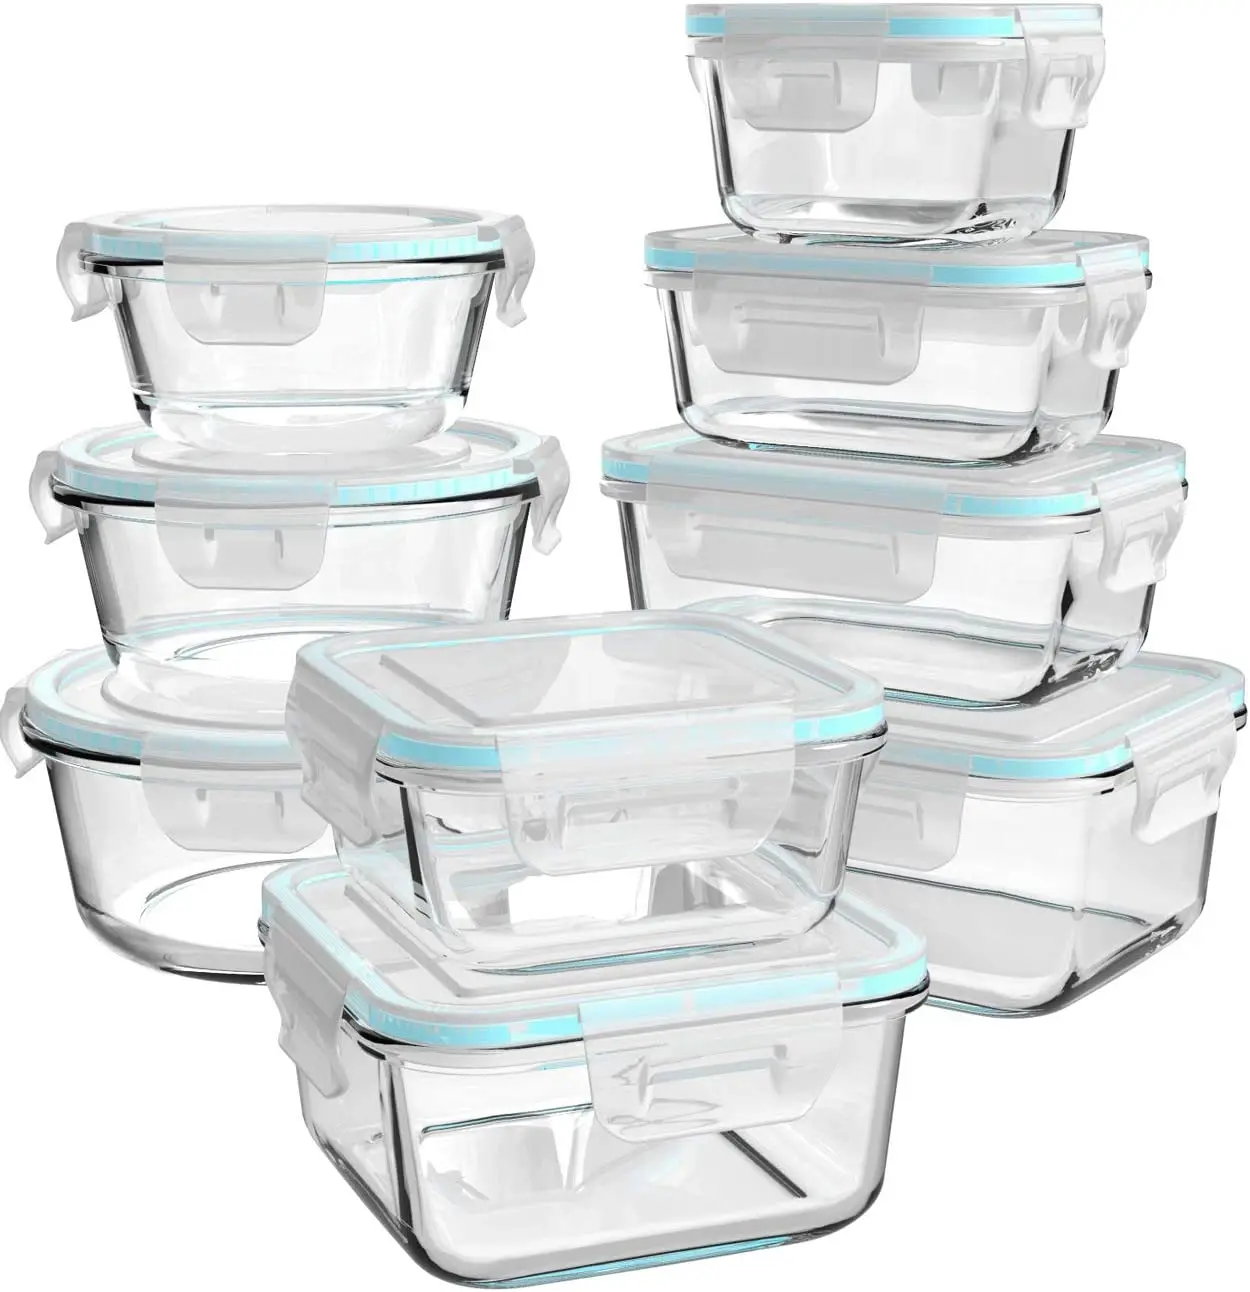 Newly Glassware Hinged Locking lids Lunch Box Kitchen Home Glass Tableware 2 Compartment Glass Meal Prep Containers